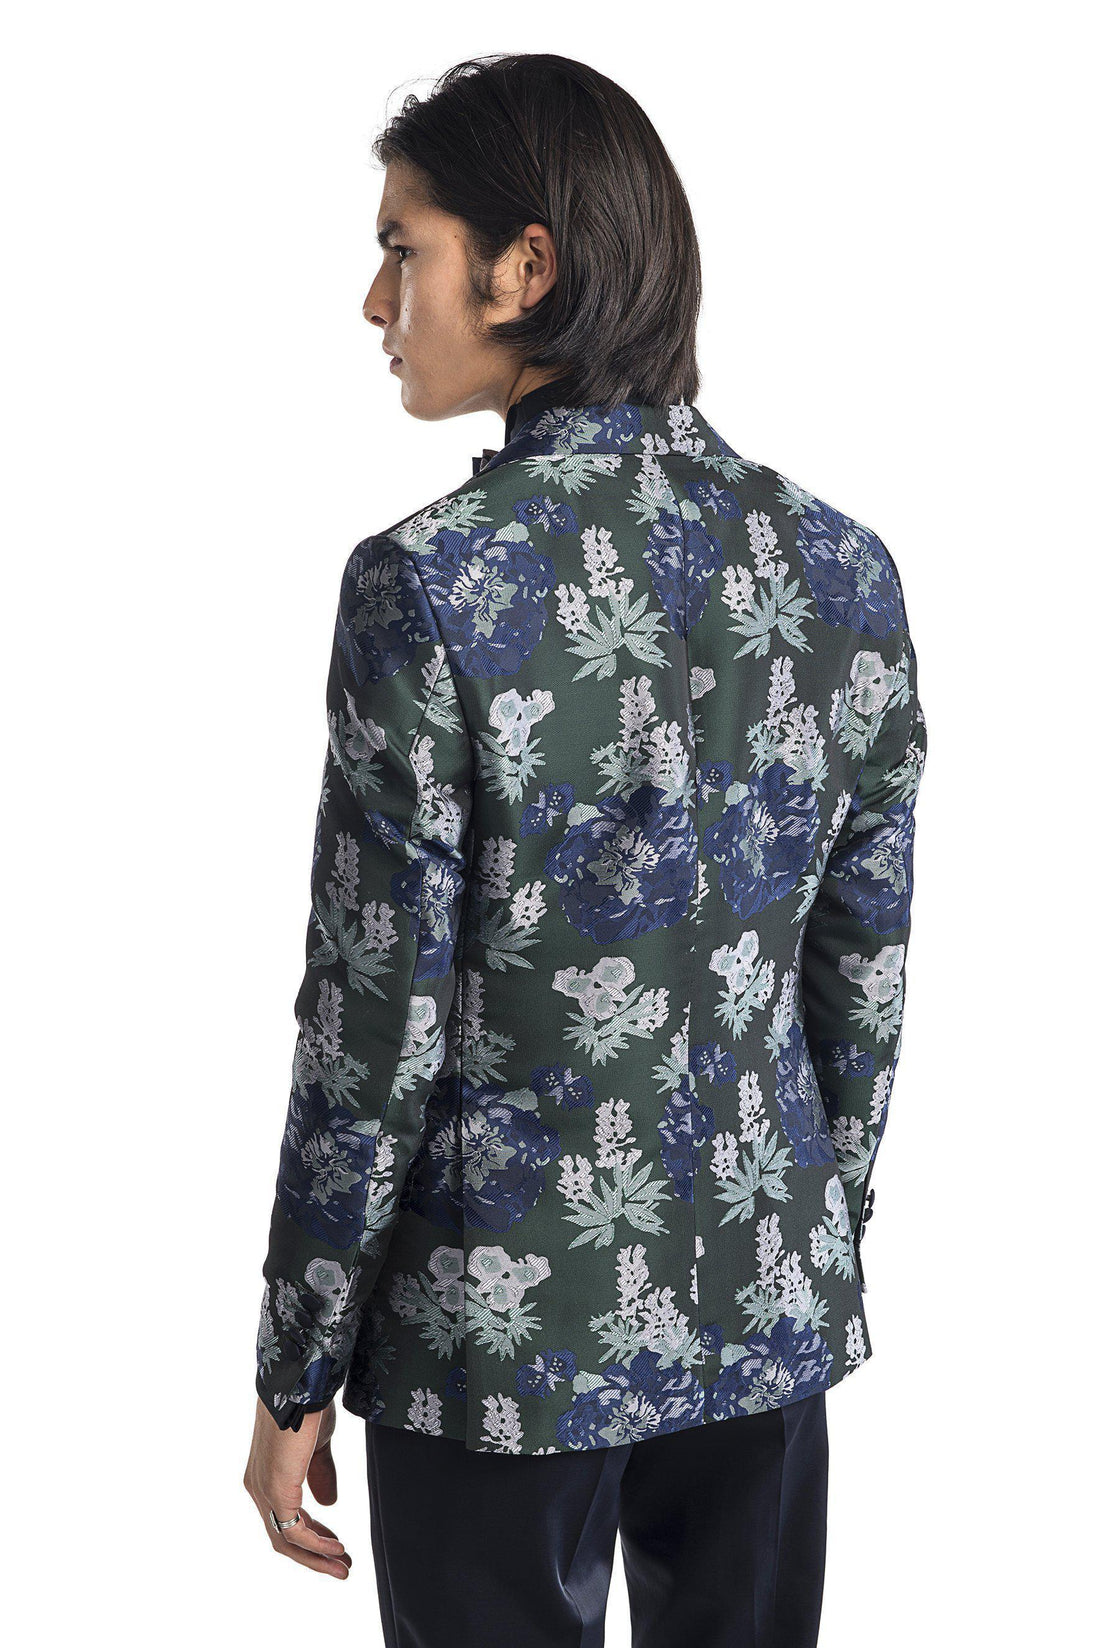 Contrast Peak Lapel All Over Floral Tuxedo - Navy Green - Ron Tomson